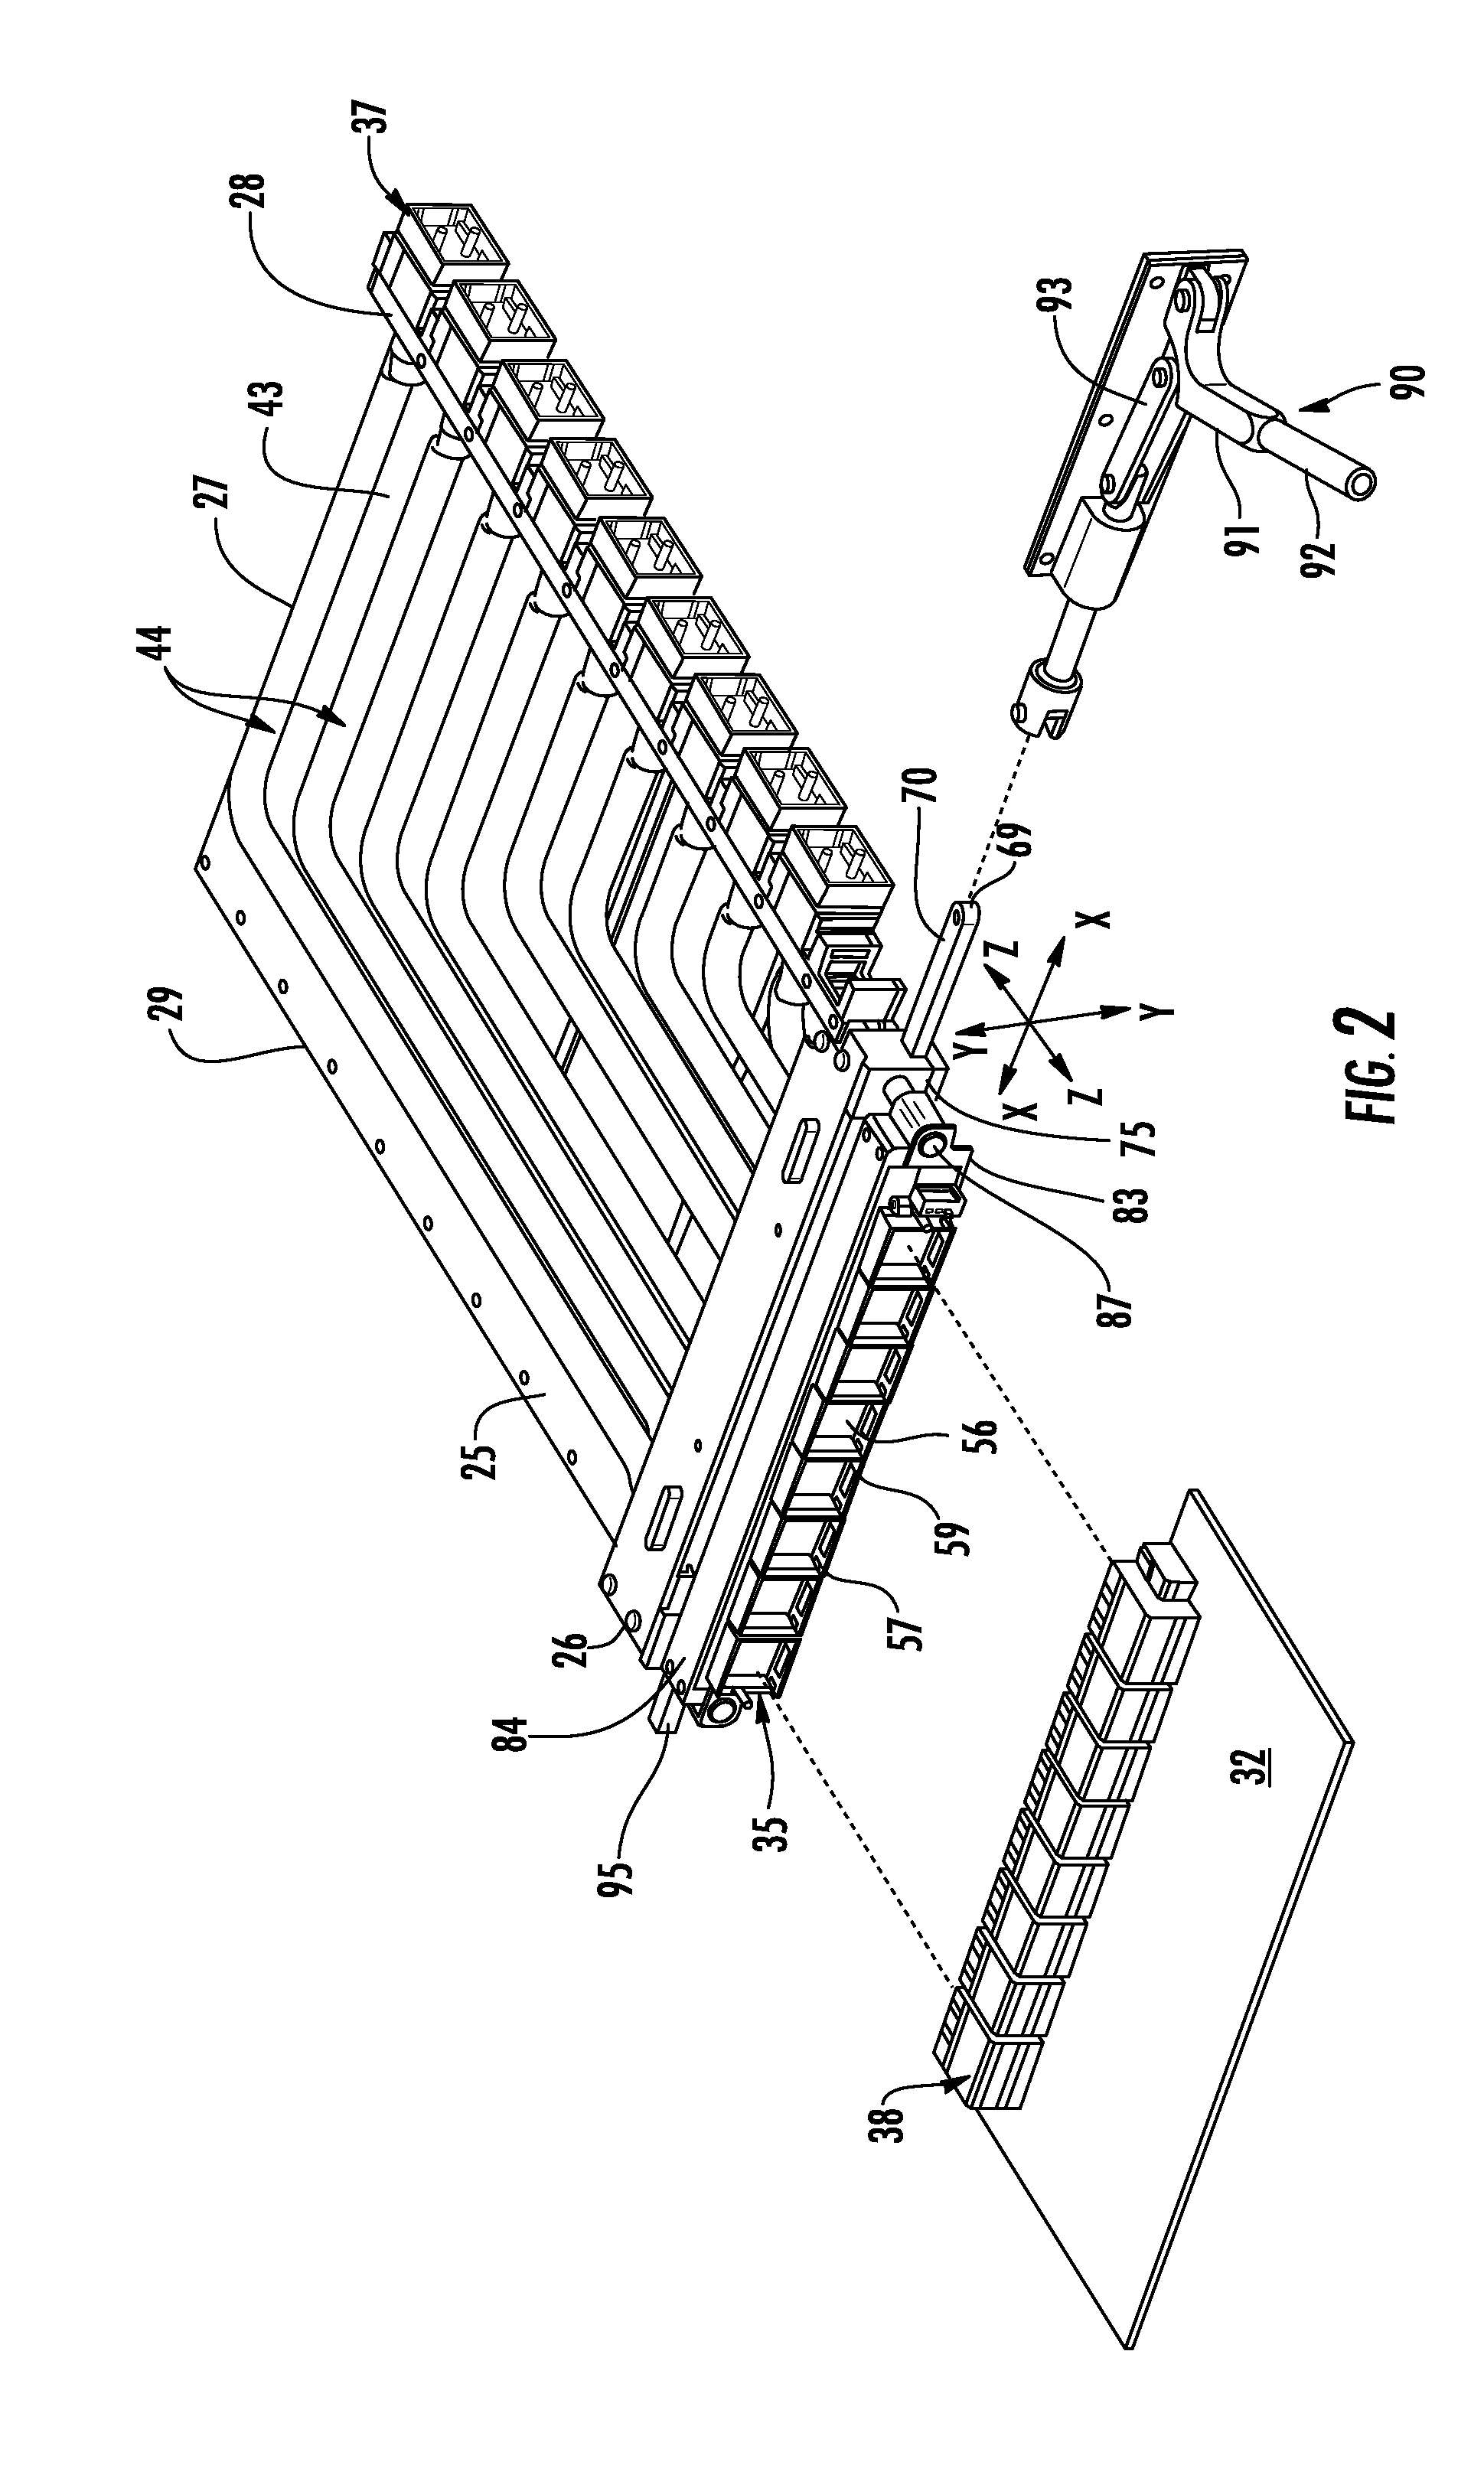 Cable module connector assembly suitable for use in blind-mate applications